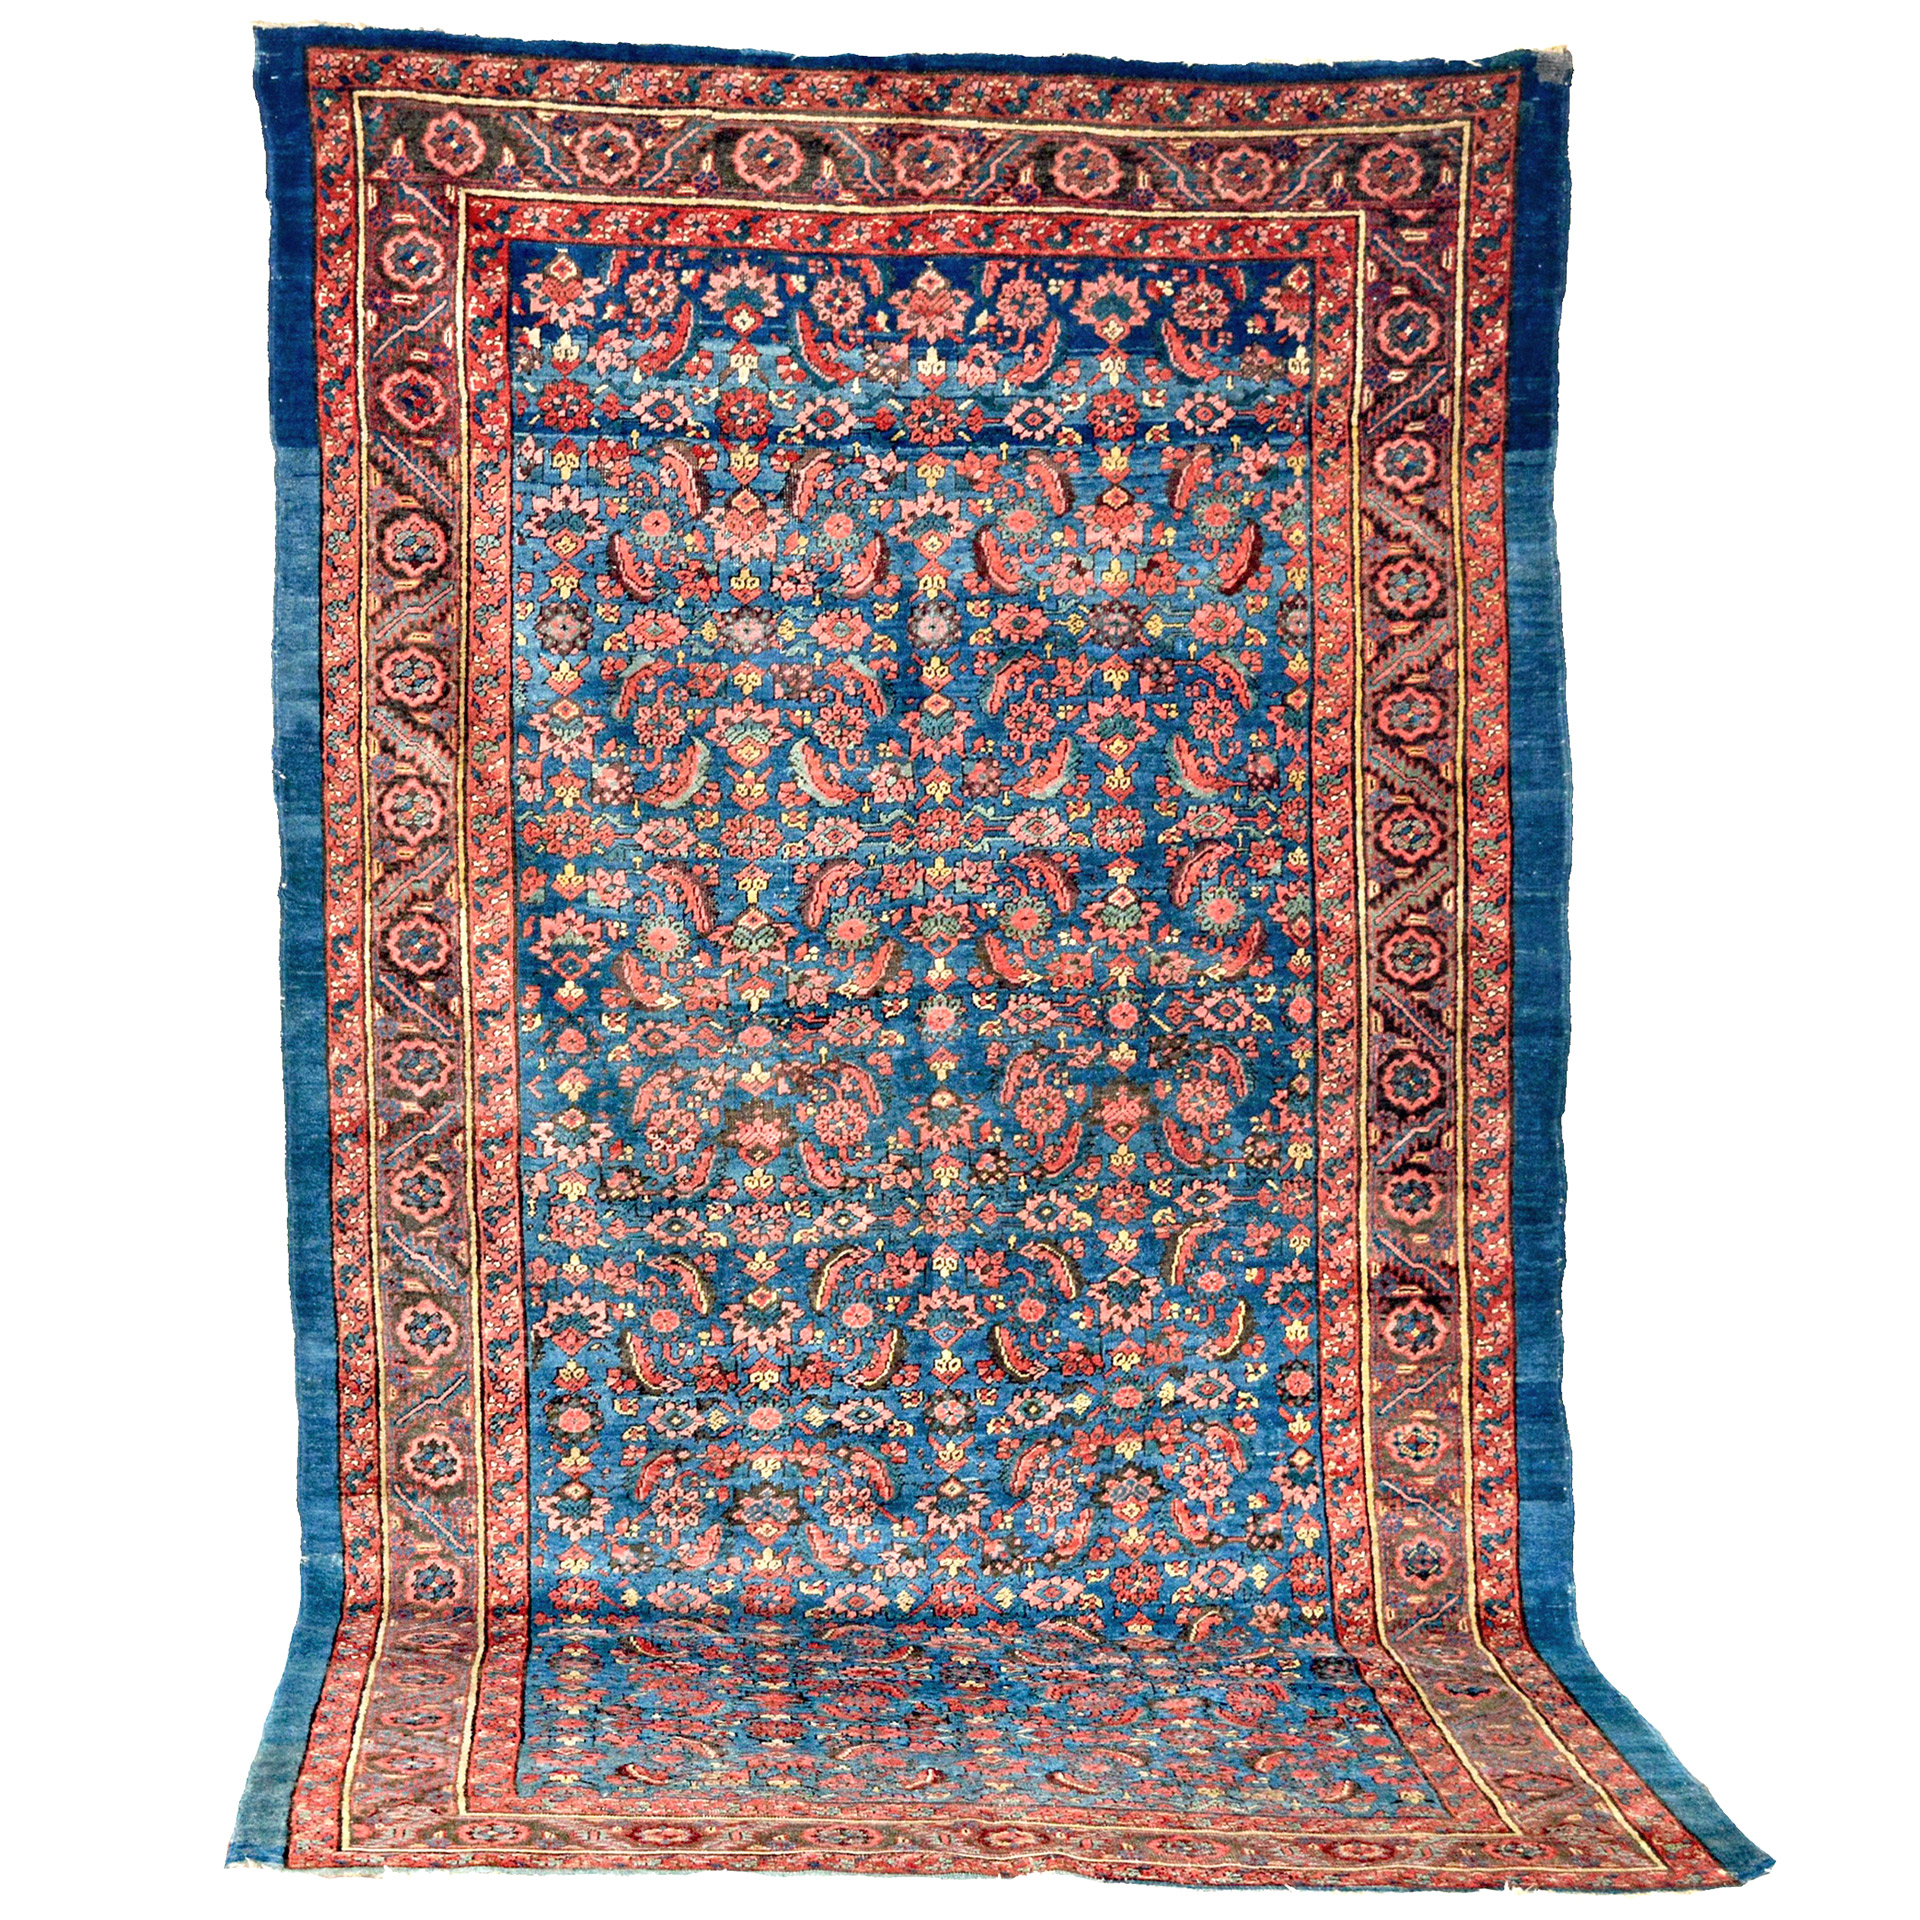 An antique Bakshaish "Kelleh" or Gallery Carpet with a modified version of the classical Herati design on a denim blue field, Heriz area, northwest Persia, late 19th century - Douglas Stock Gallery, antique Oriental rugs Boston,MA area, antique Persian carpets, South Natick,MA, antique rugs New England